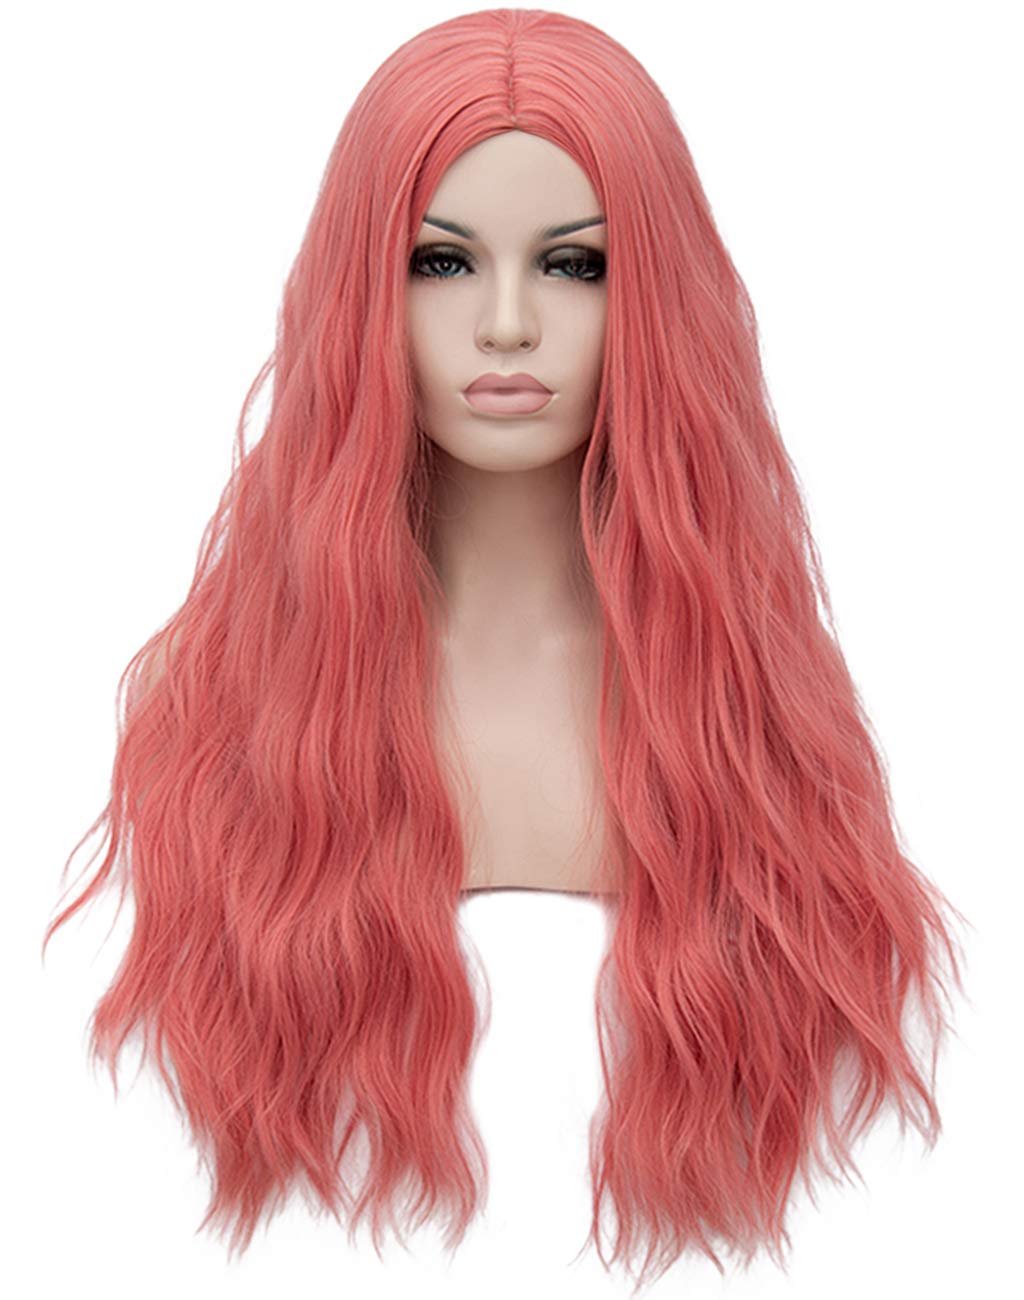 Price:$18.99     Mildiso Pink Wigs for Women Long Curly Wavy Hair Wigs Natural Cute Fashion Heat Resistant Synthetic Wigs for Party Daily Cosplay Halloween M101PK   Beauty